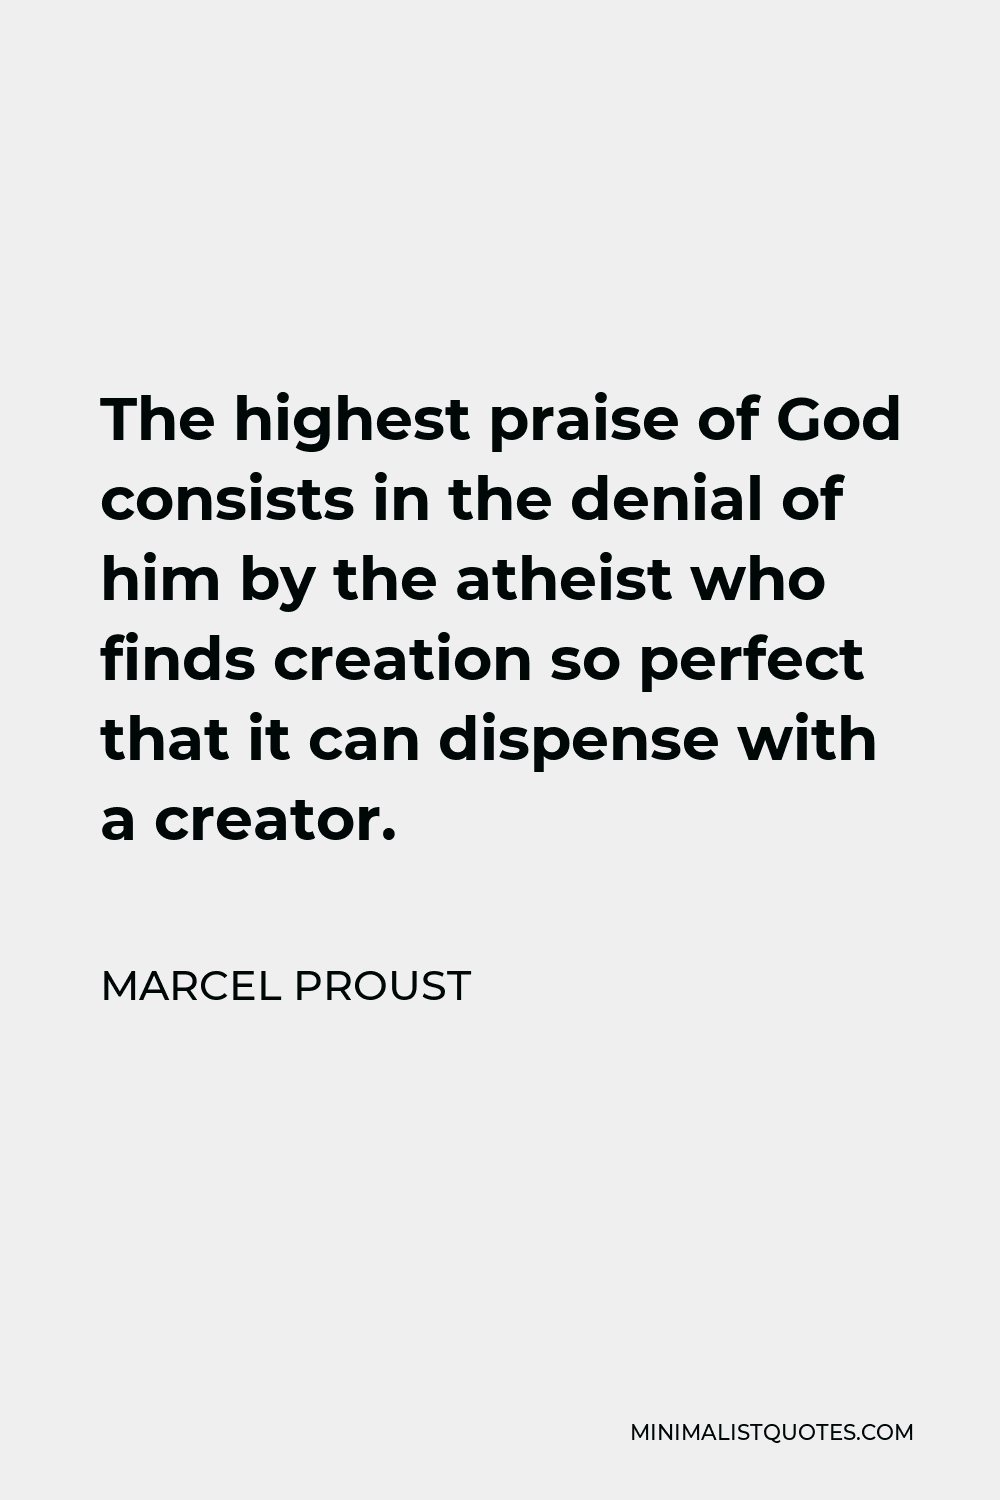 Marcel Proust Quote - The highest praise of God consists in the denial of him by the atheist who finds creation so perfect that it can dispense with a creator.